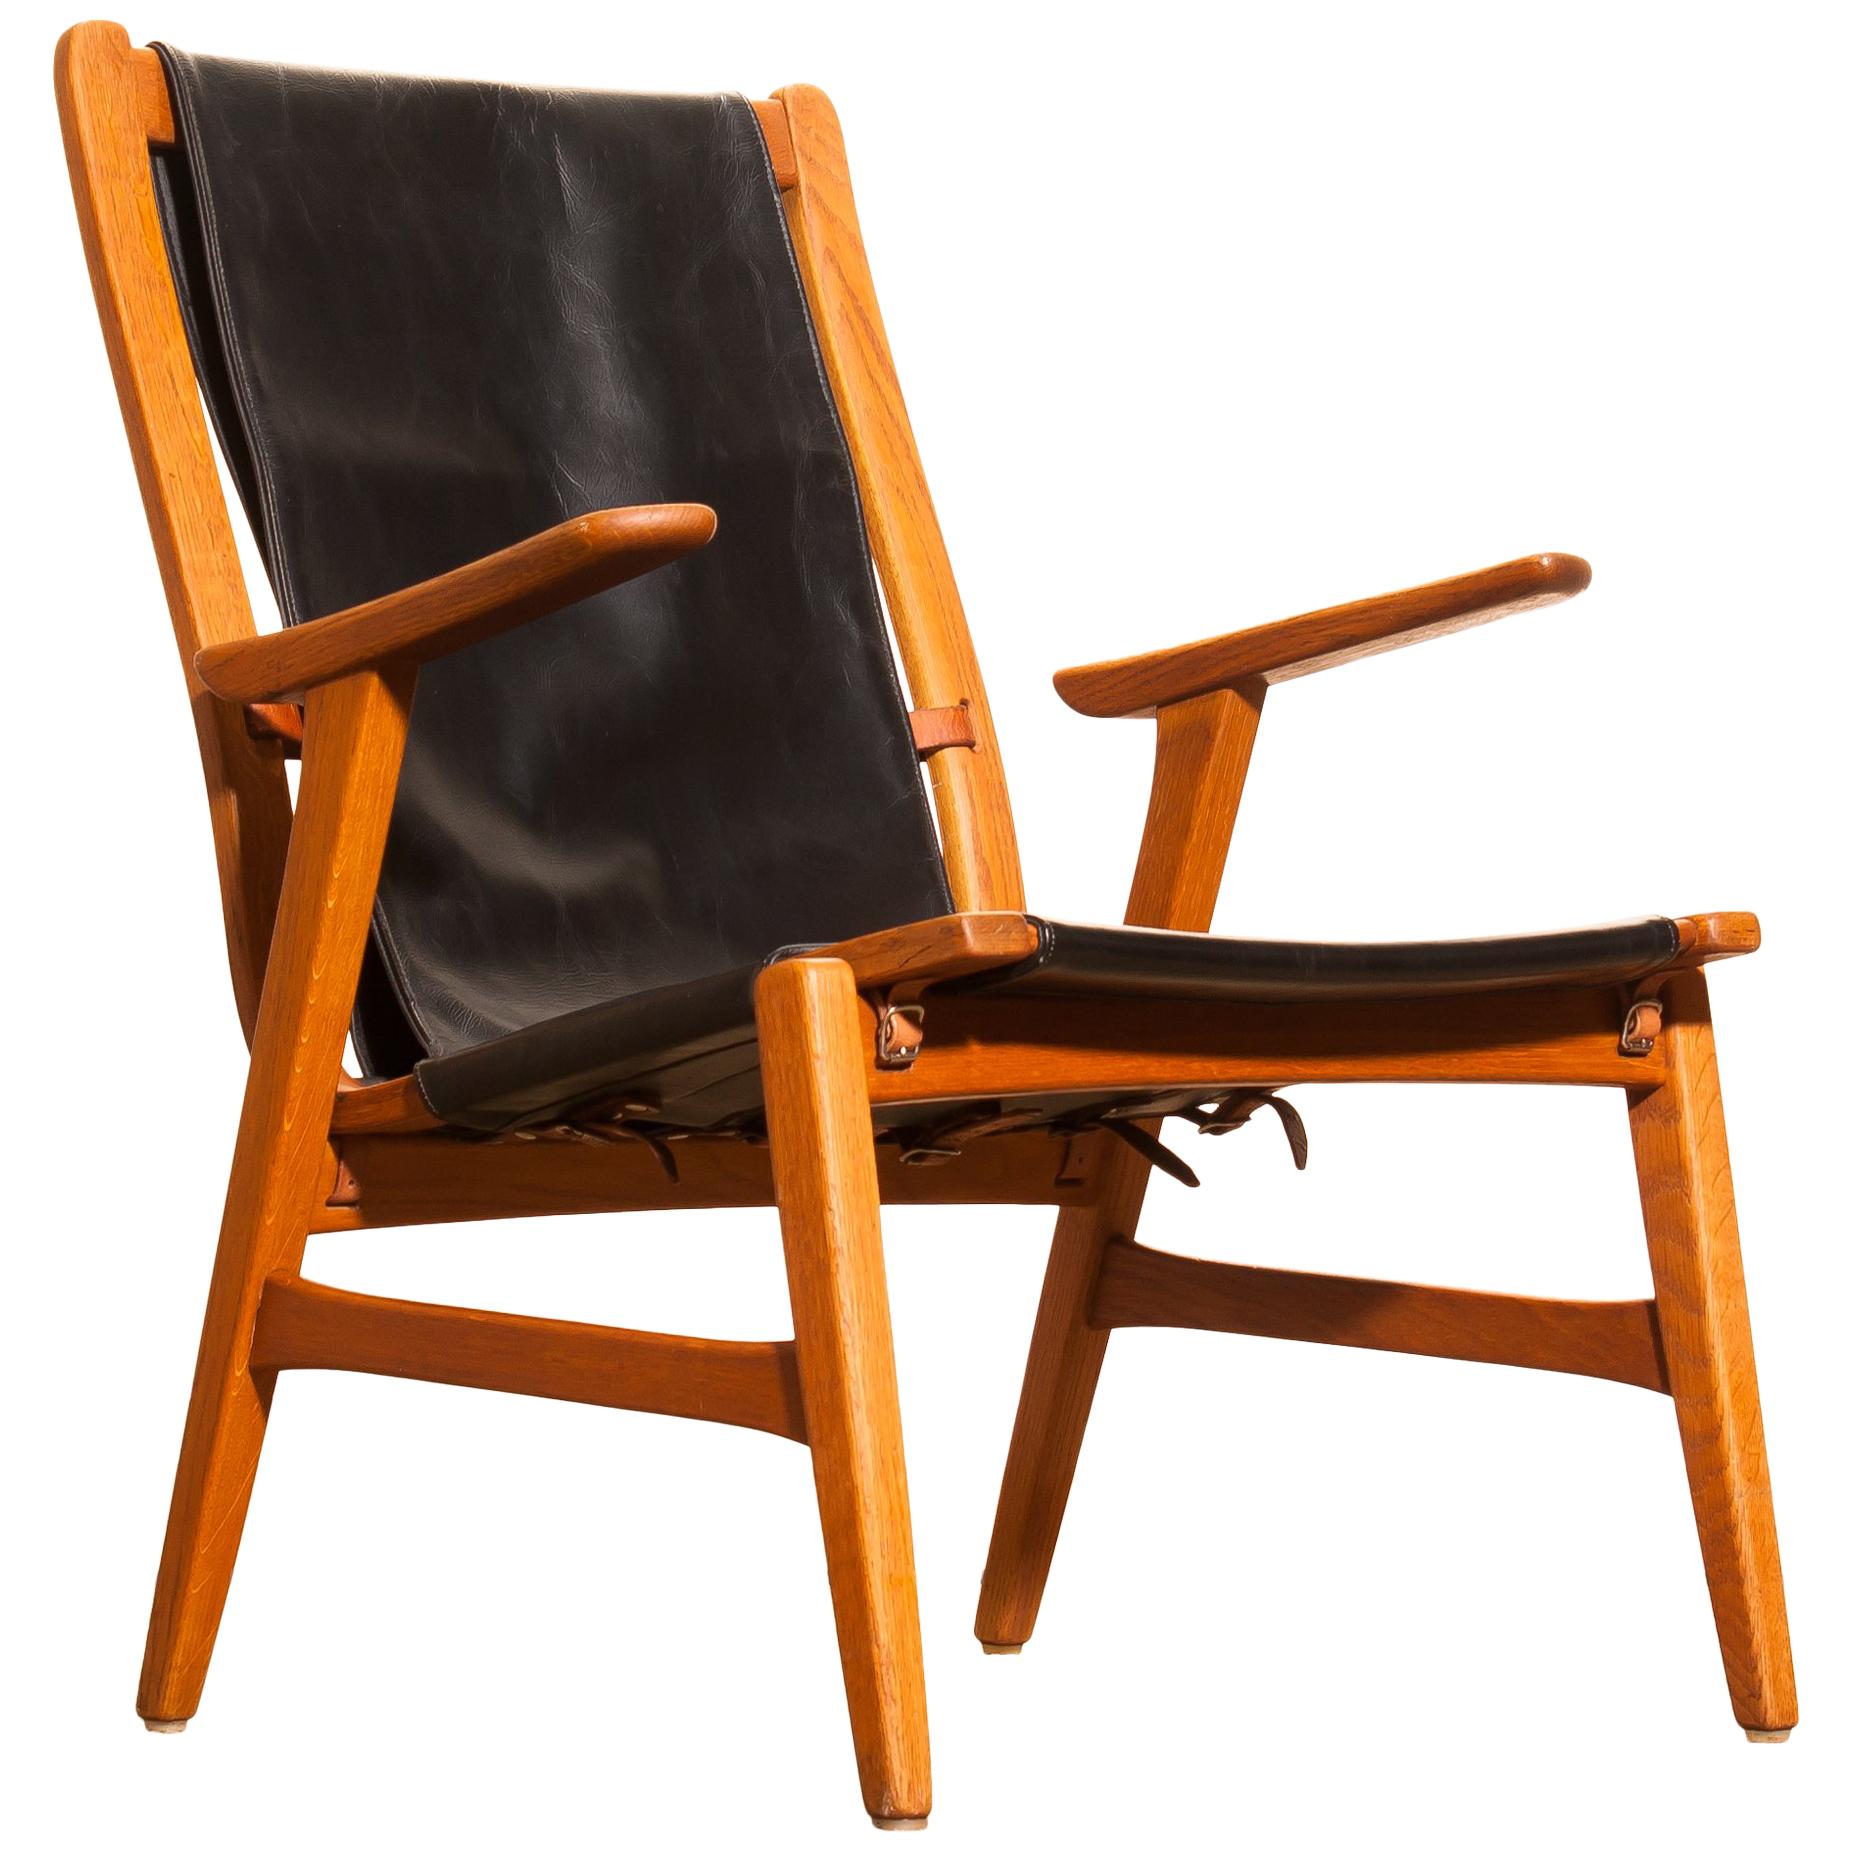 1950s, Oak and Leather Hunting Chair 'Ulrika' by Östen Kristiansson